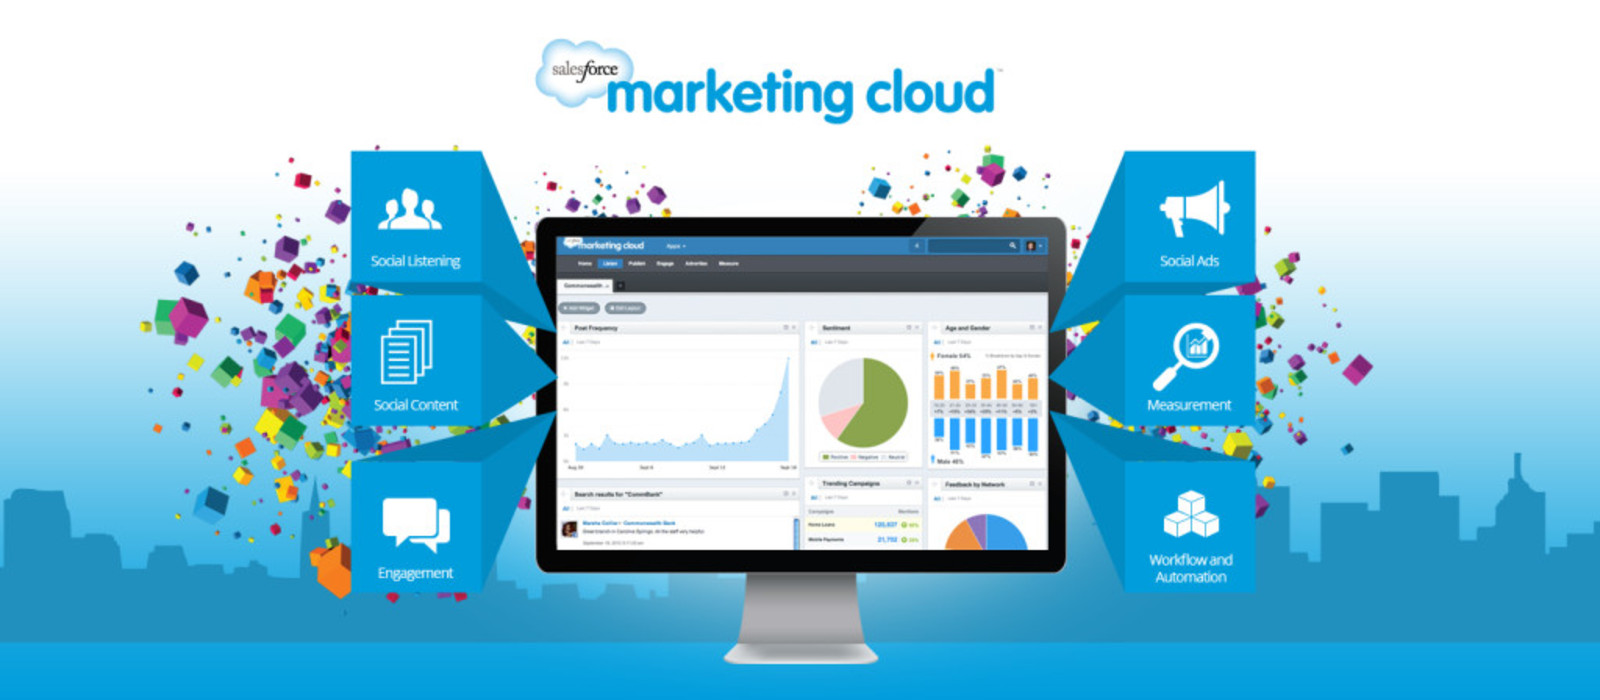 Optimize marketing campaigns with the help of customer insight data to boost personalization.